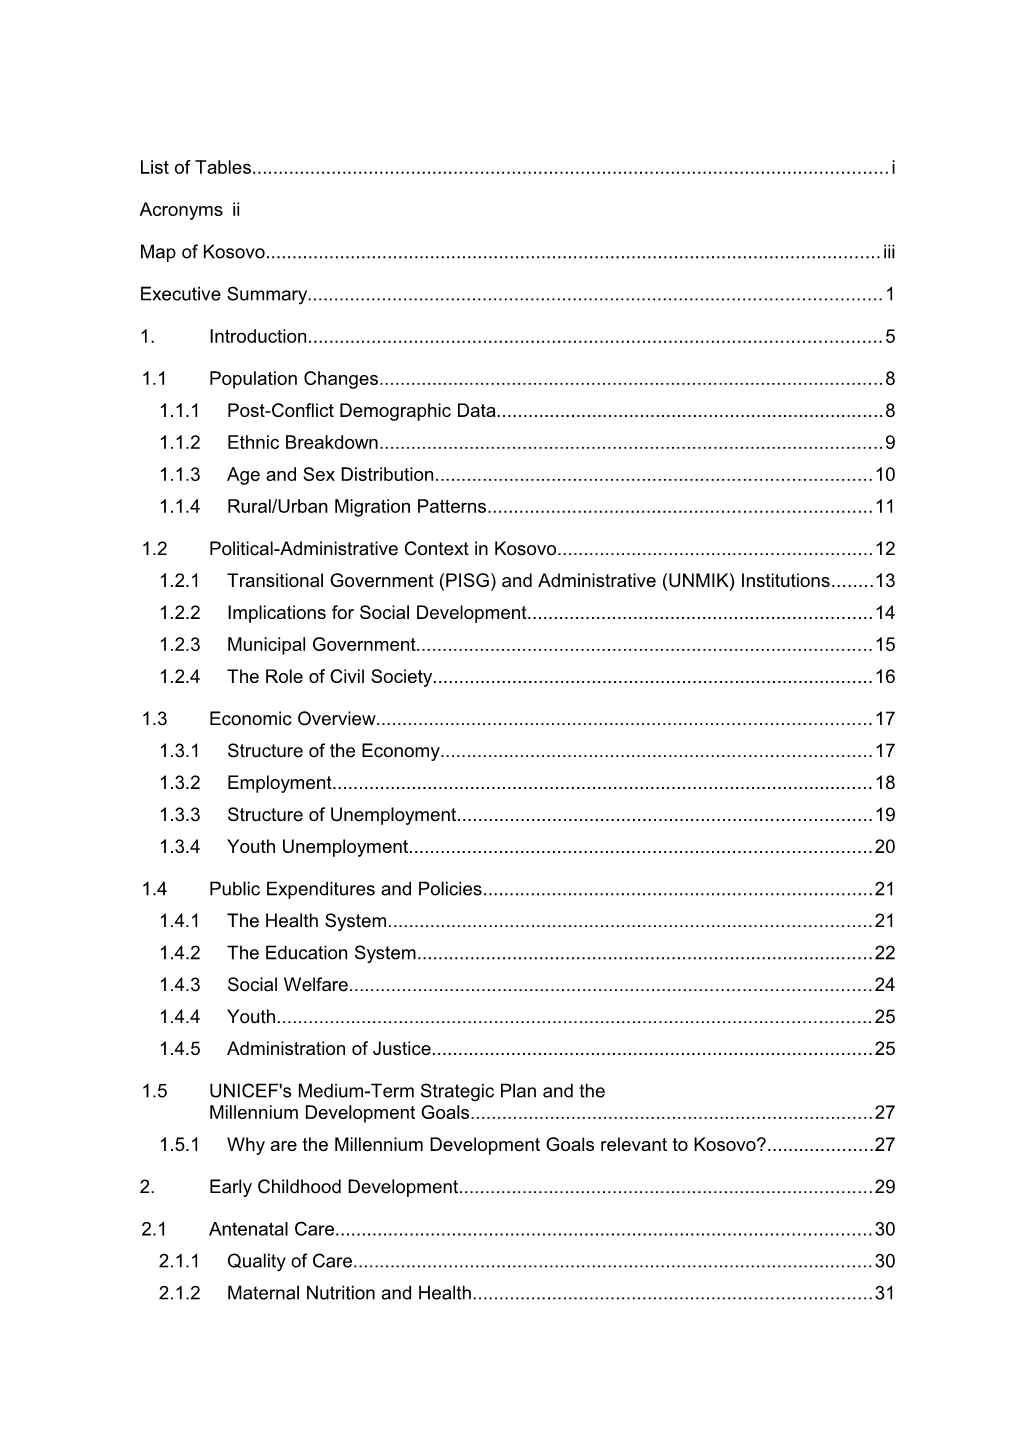 Situation Analysis of Children and Women in Kosovo Table of Contents